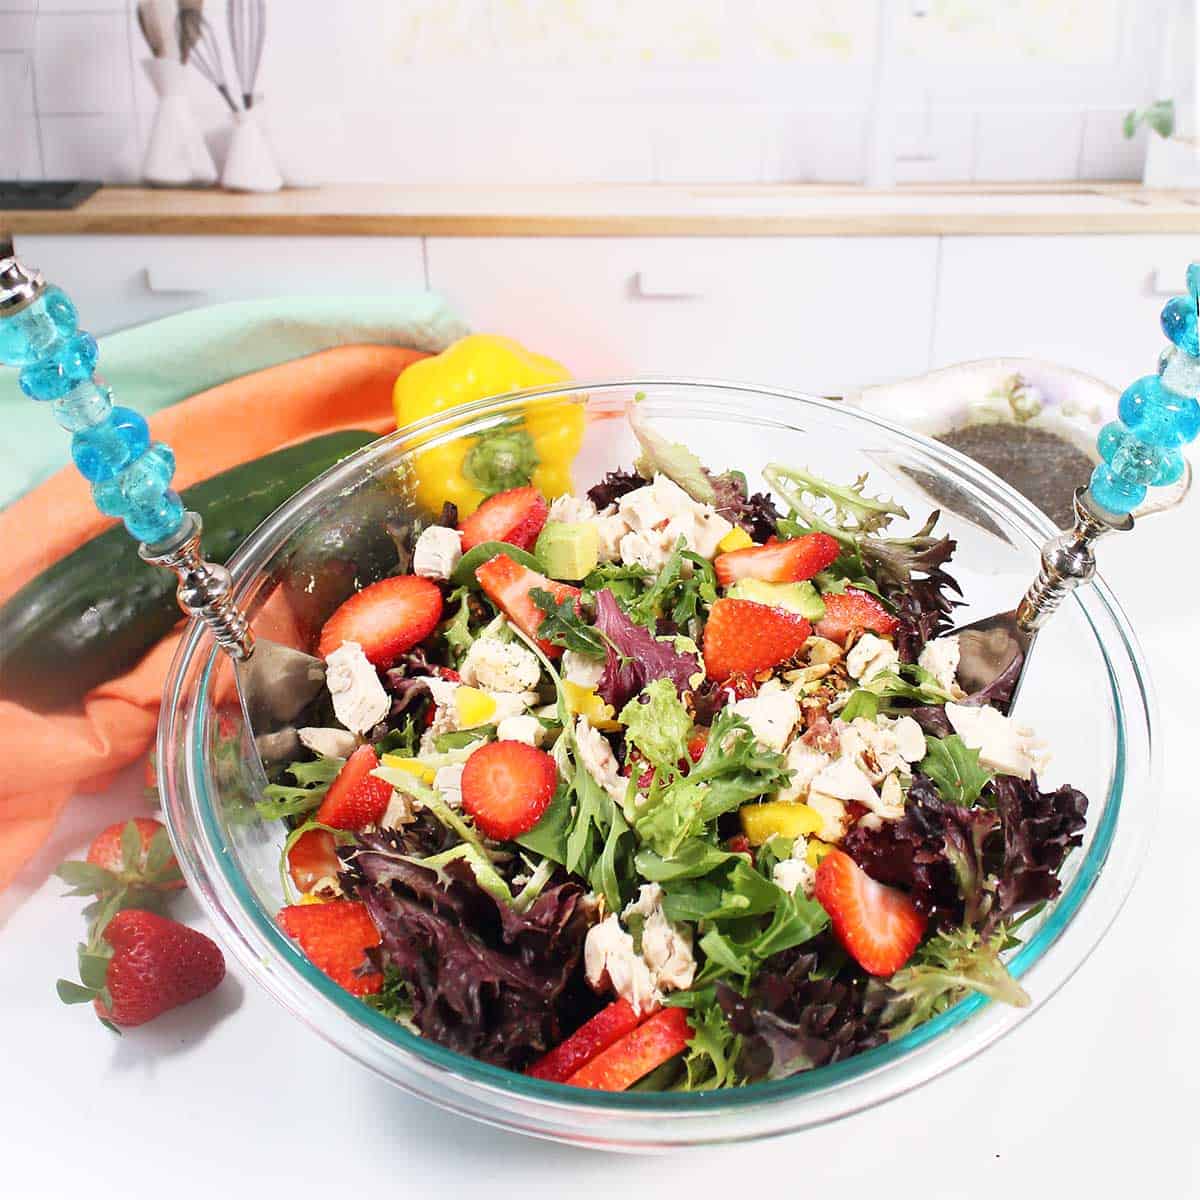 Tossed salad with salad spoon and fork.